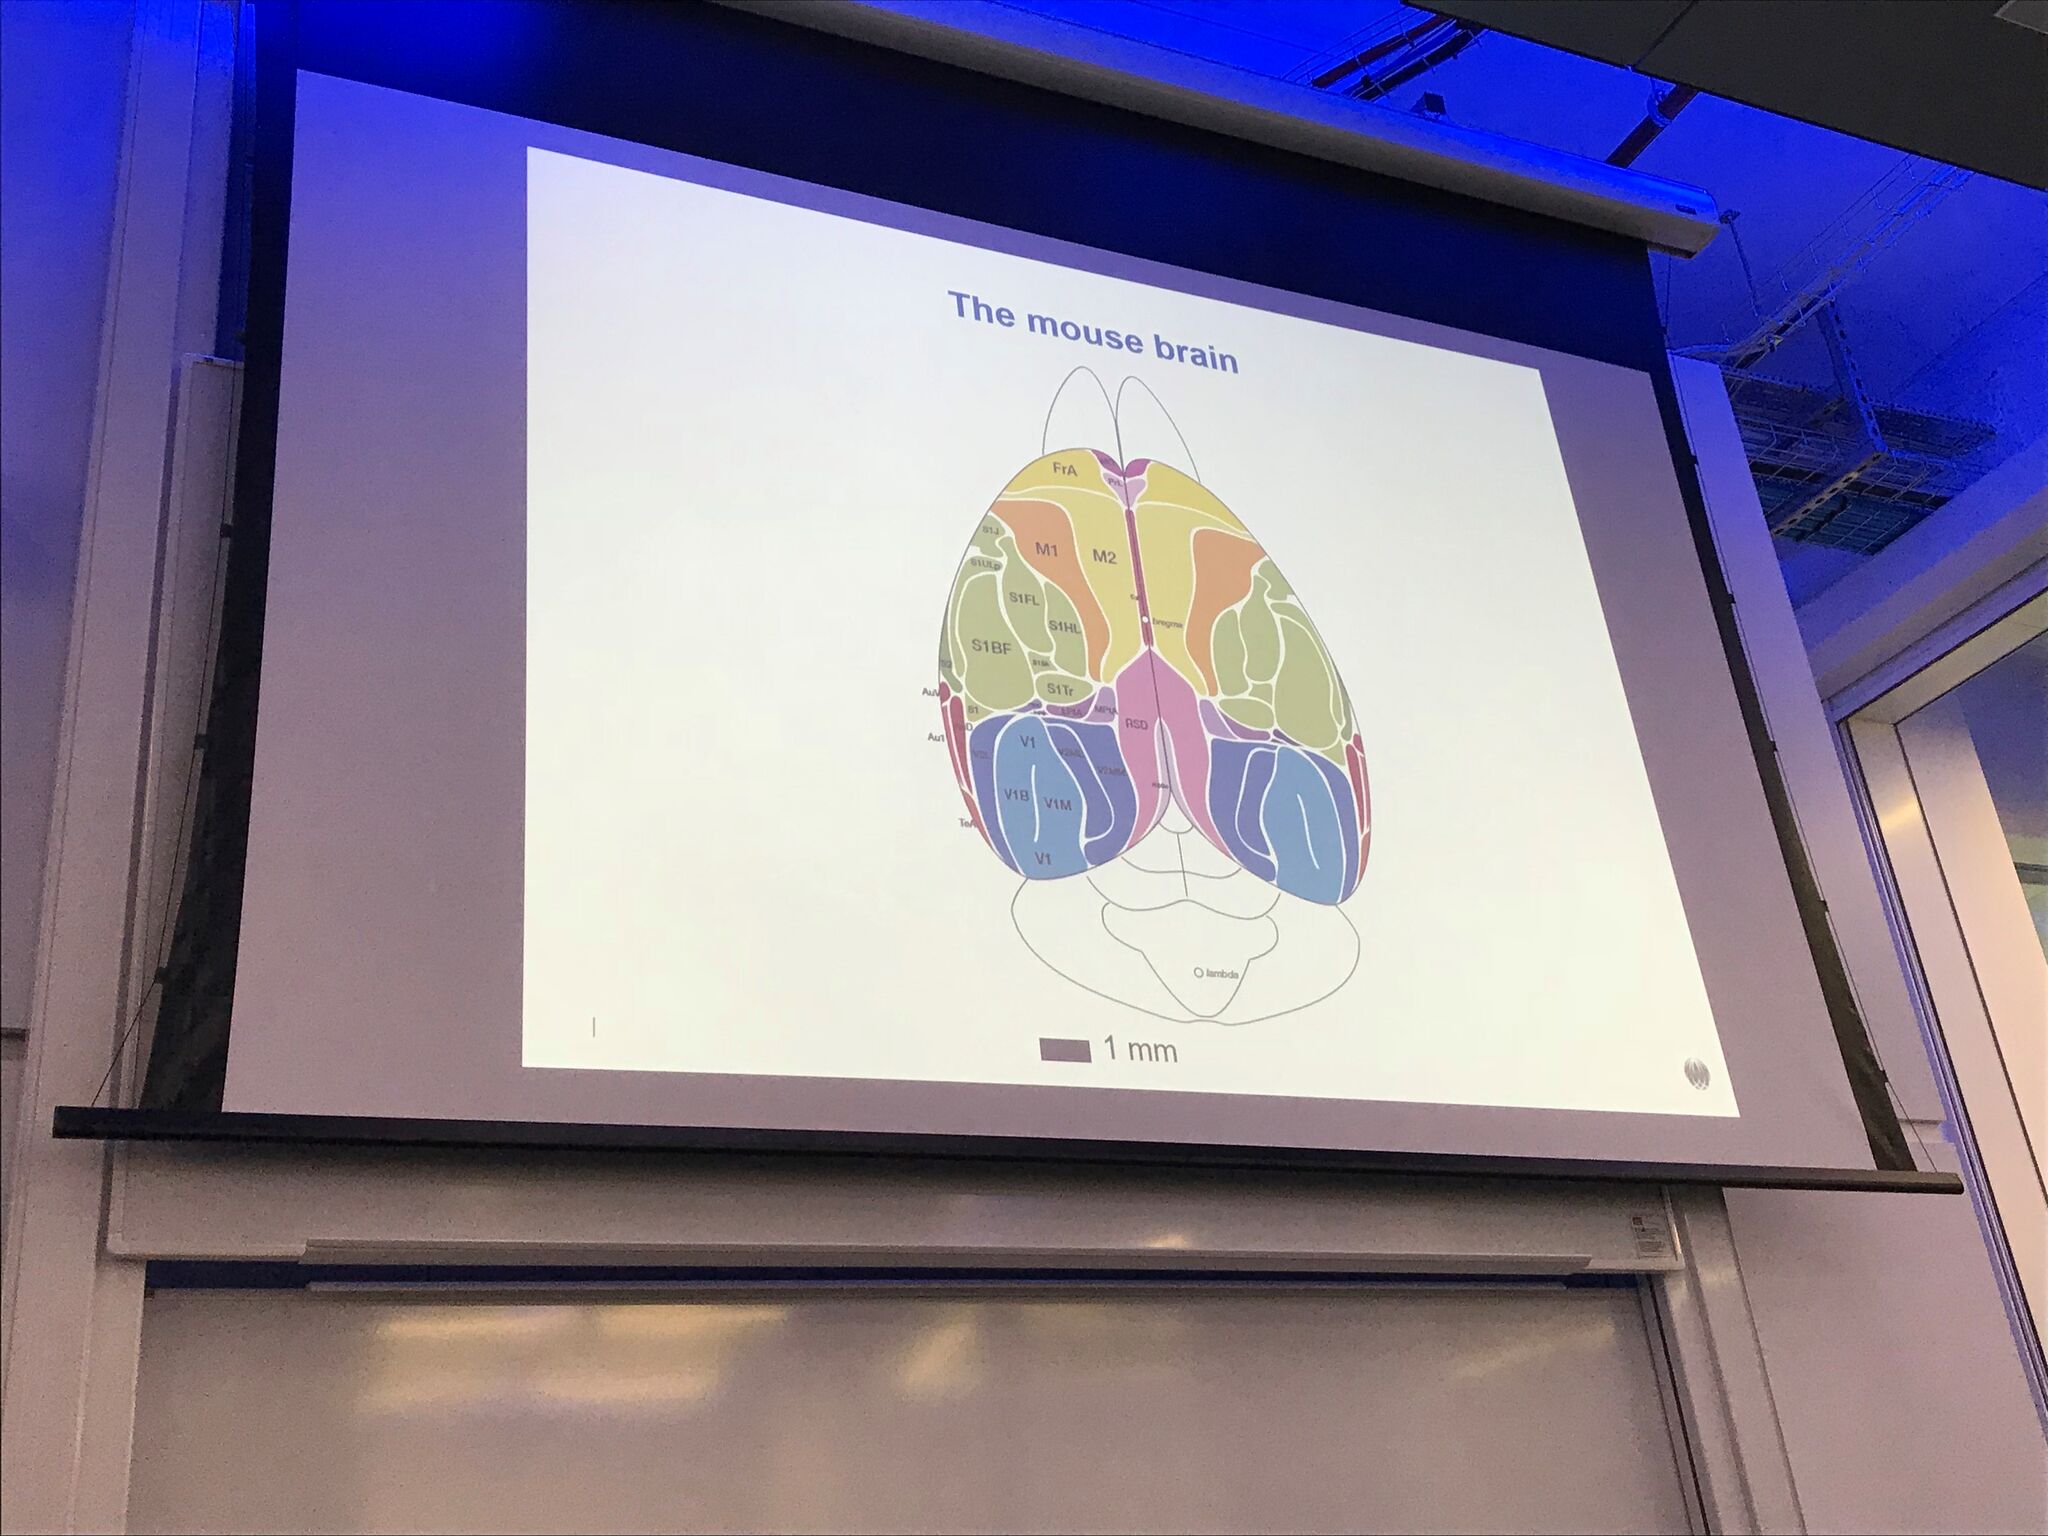 Slide showing diagram of a mouse brain from Jérôme Lecoq's seminar